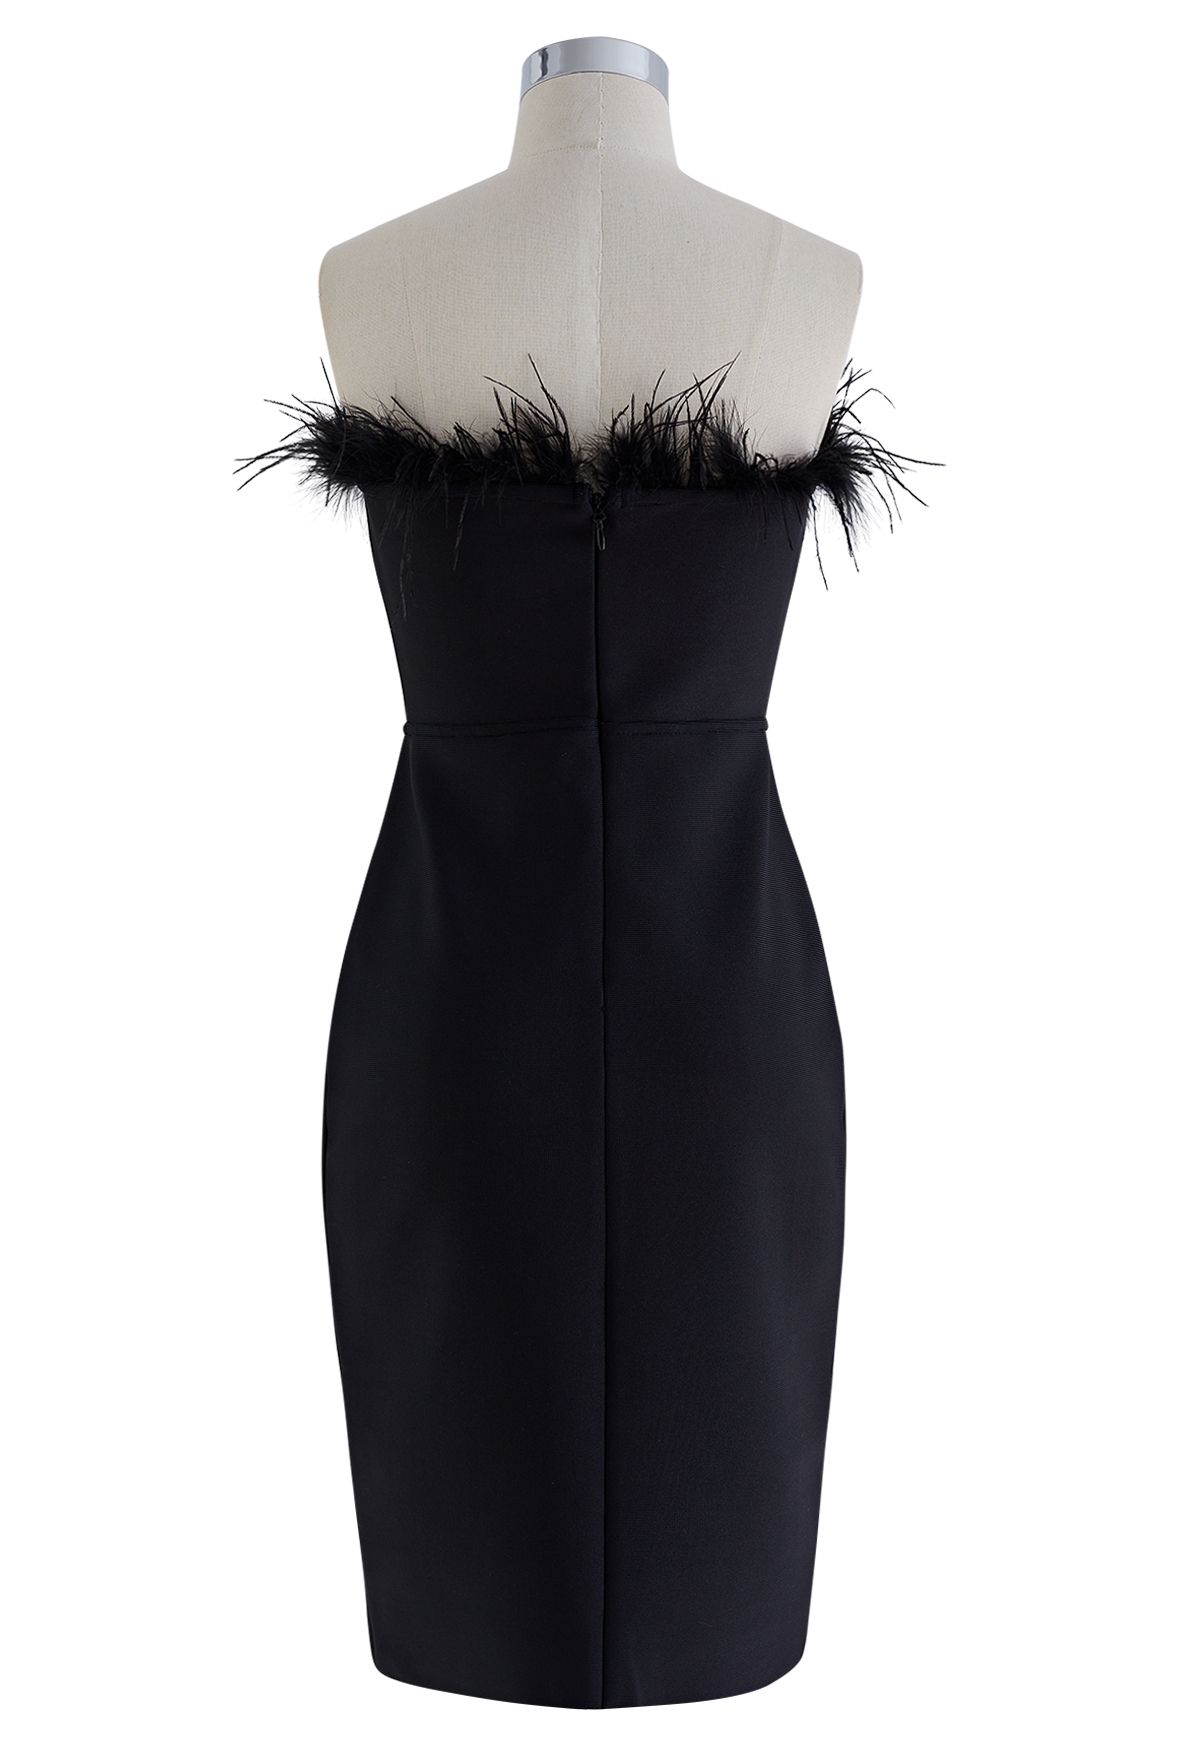 Feather Trim Bodycon Tube Cocktail Dress in Black